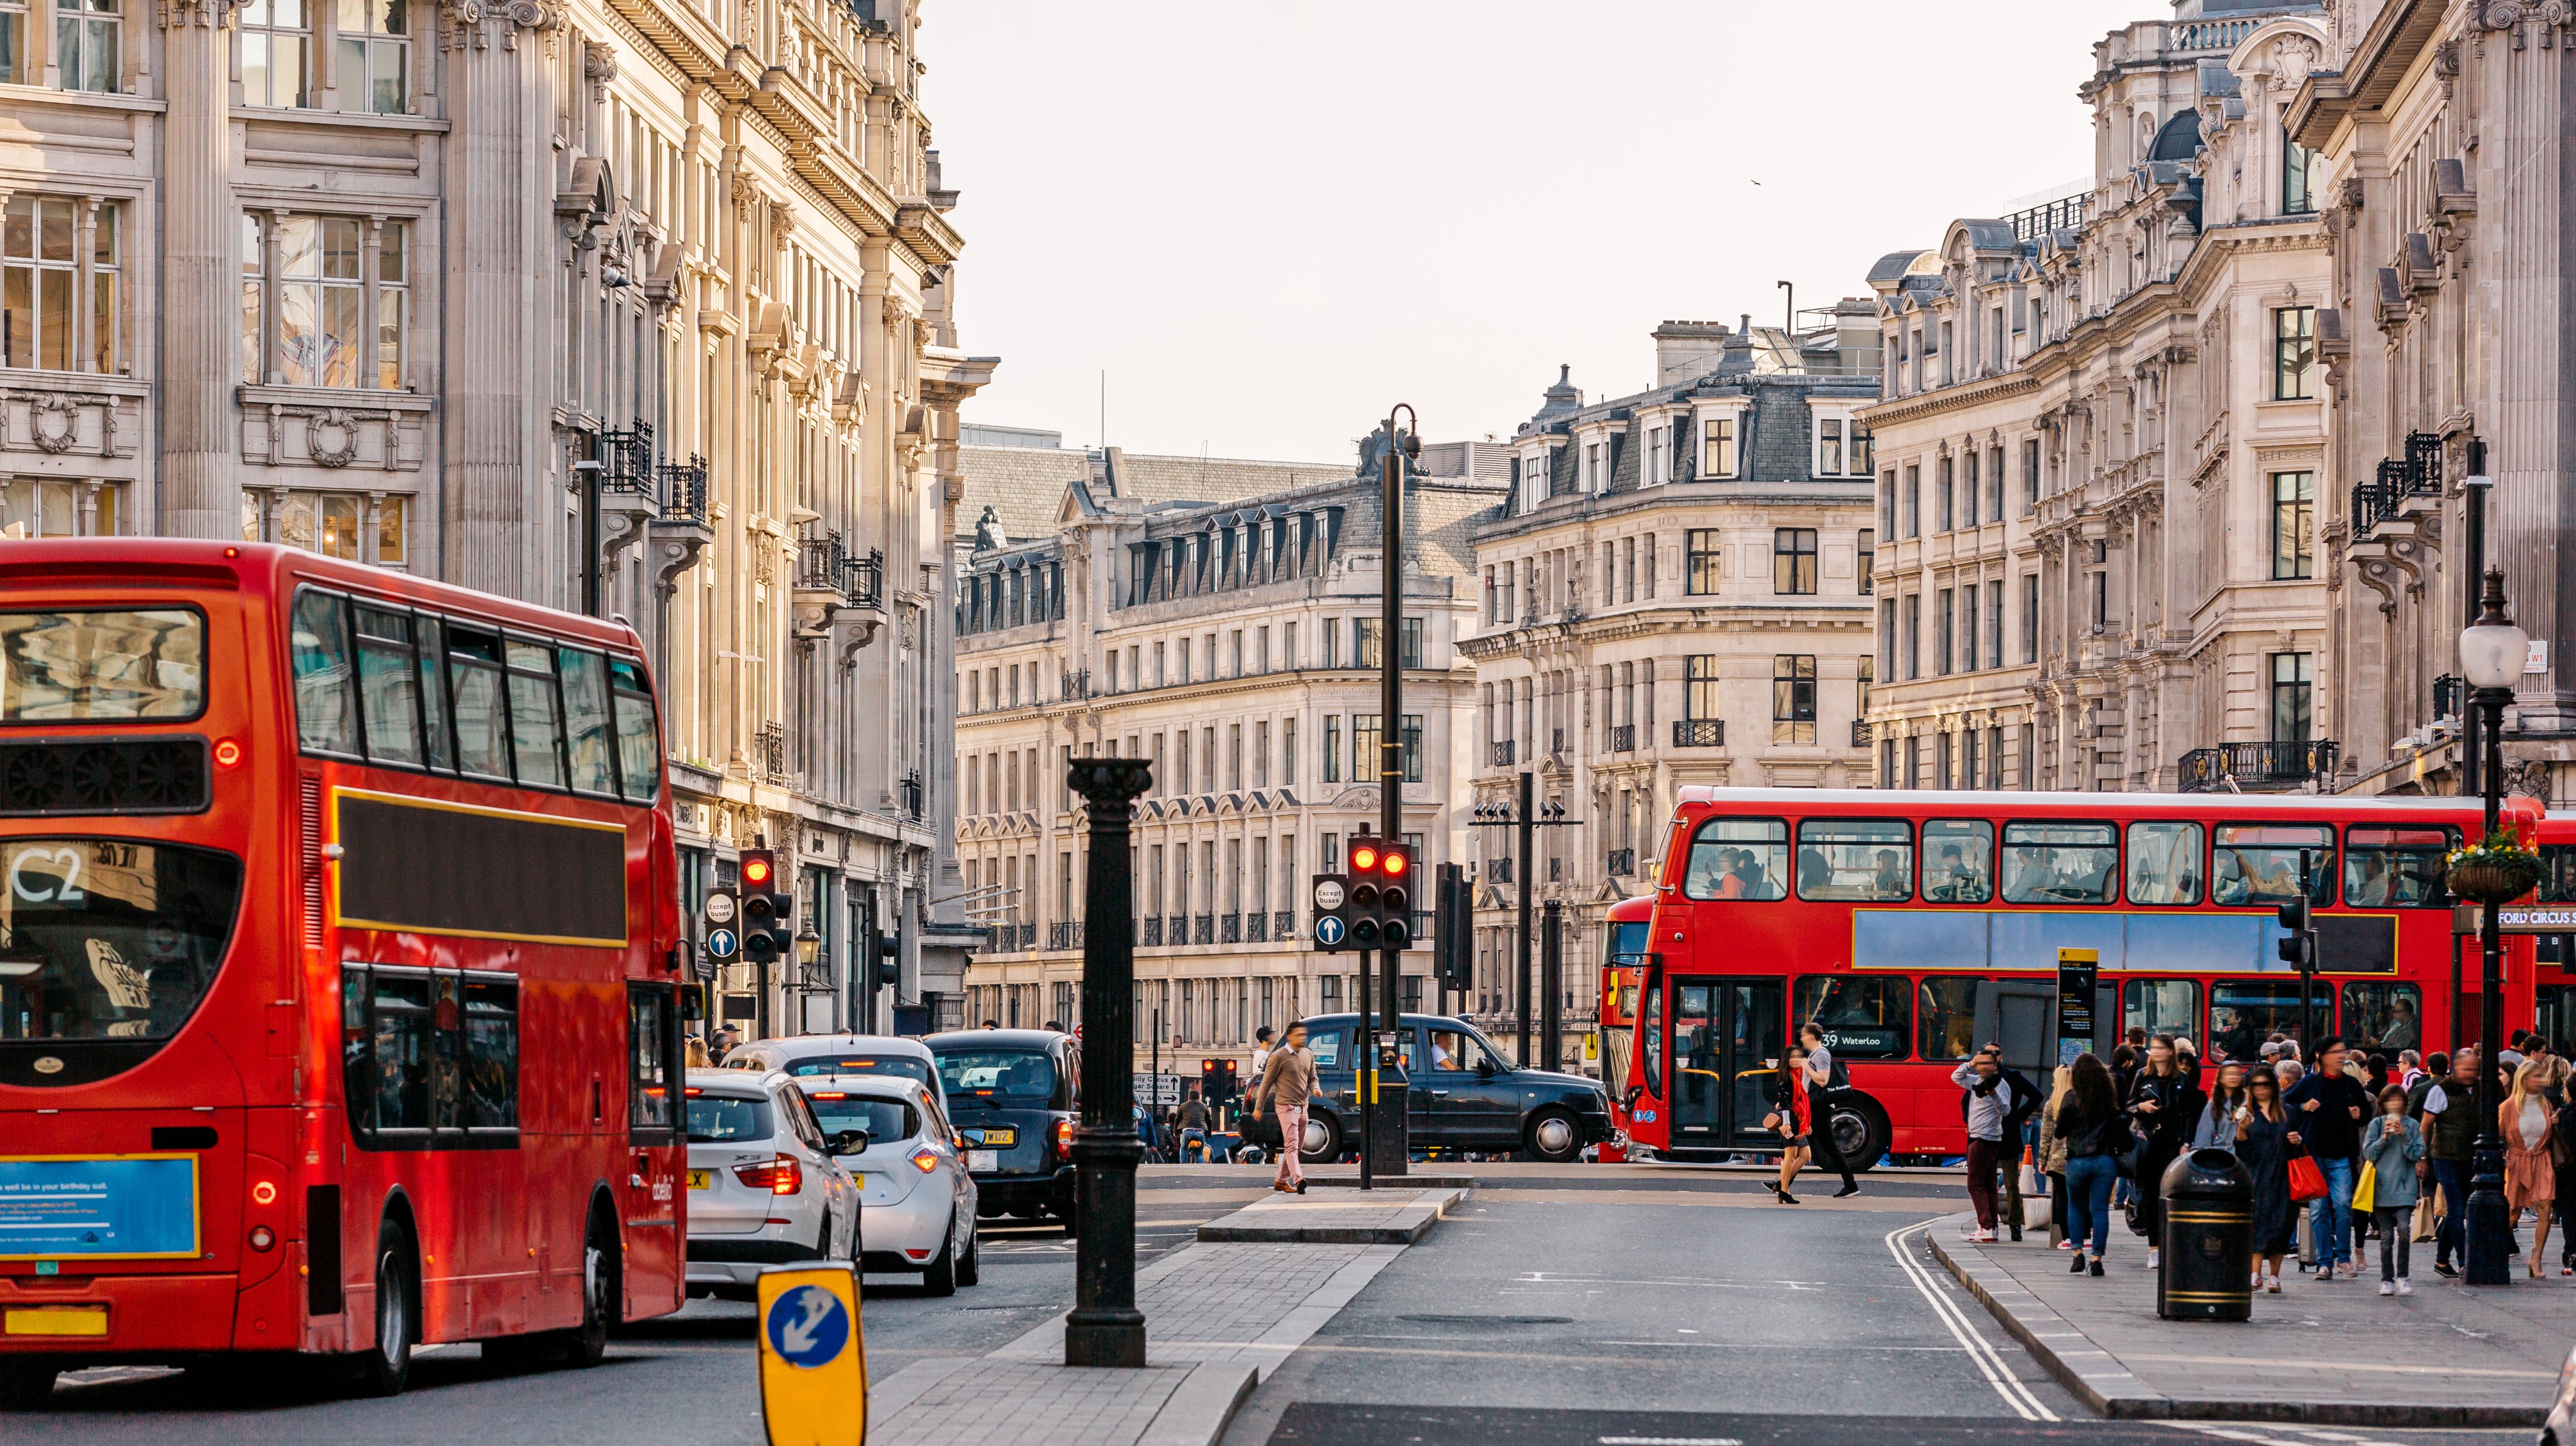 Regent Street and Oxford Street intersection in London, UK